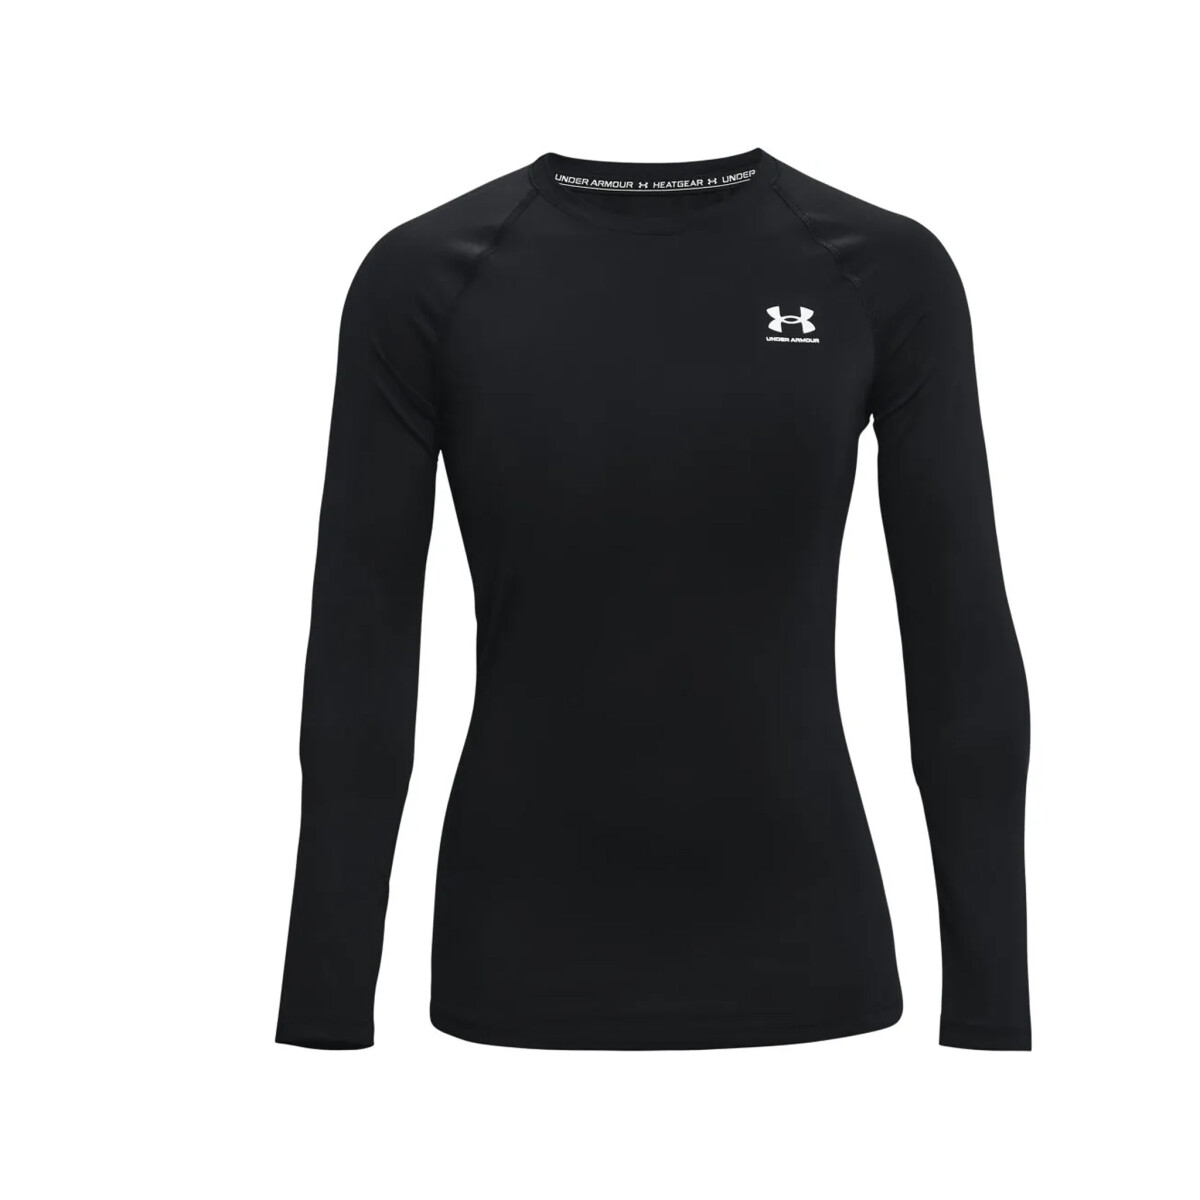 UNDER ARMOUR COMPRESSION LONG SLEEVE - Black 